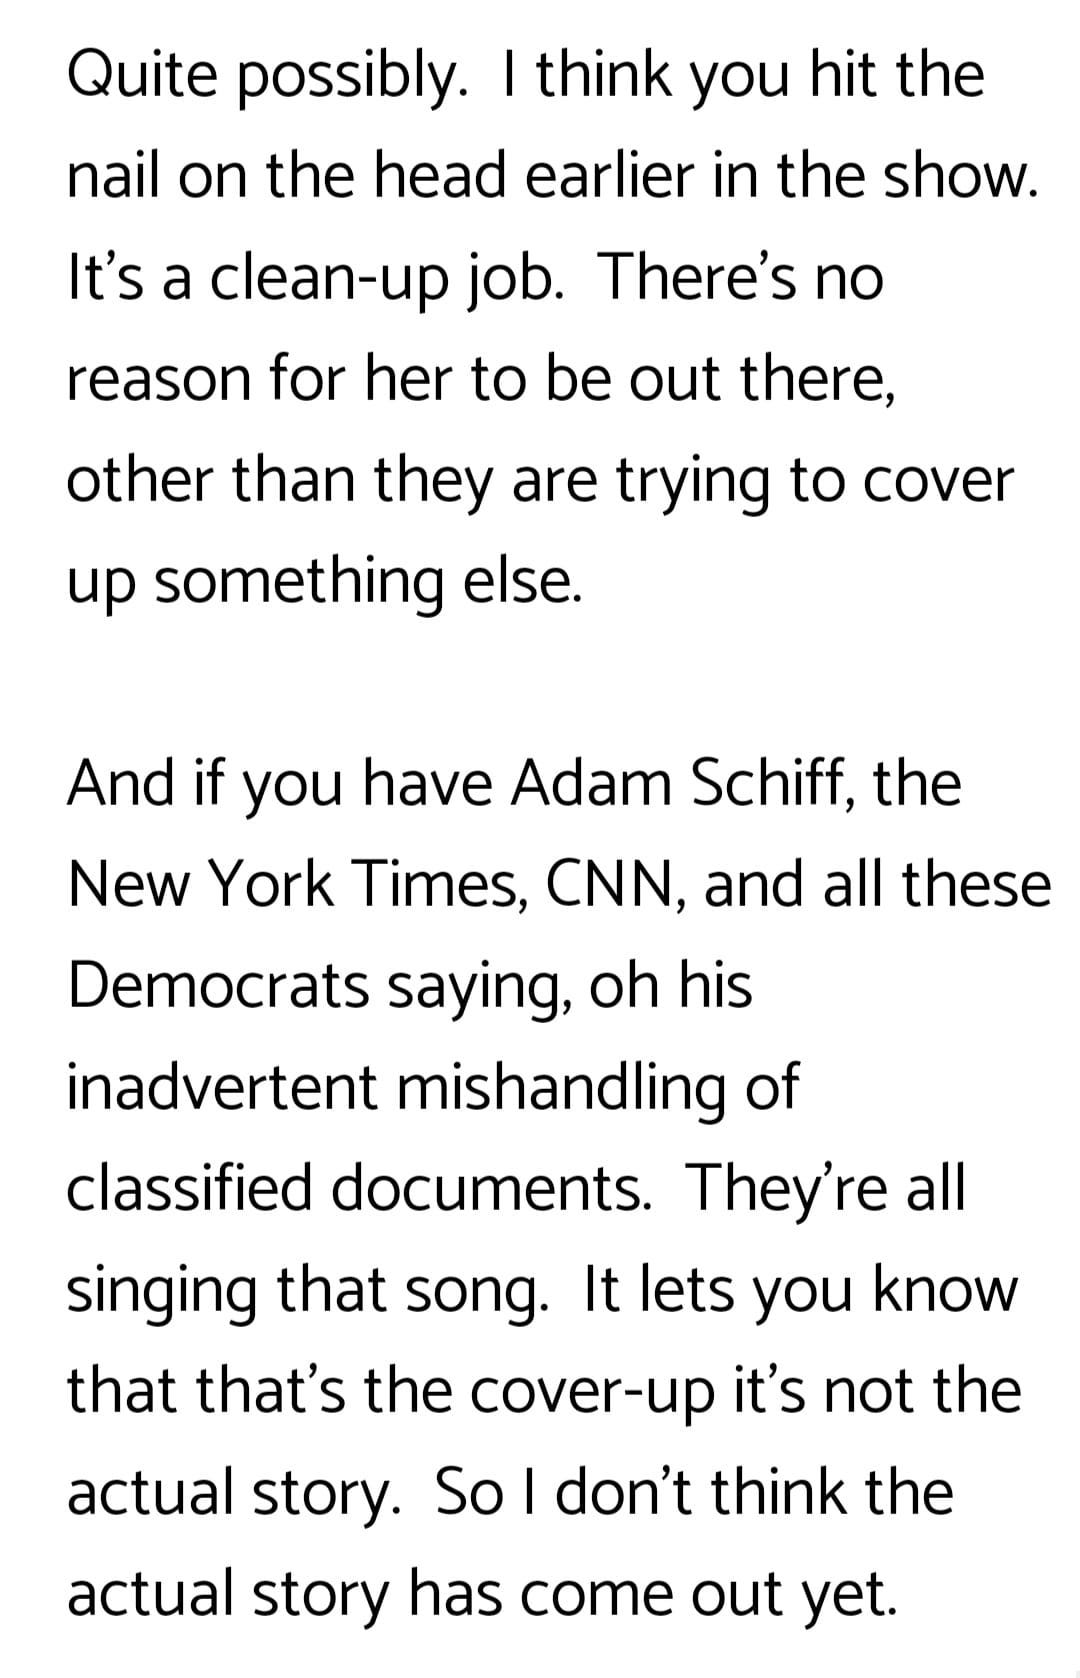 May be an image of text that says 'Quite possibly. think you hit the the nail on the head earlier in the show. It's a clean-up job. reason for her to be out there, There's no other than they are trying to cover up something else. And if you have Adam Schiff, the New York Times, CNN, and all these Democrats saying, oh his inadvertent mishandling of classified documents. They're all singing that song. It lets you know that that's the cover-up it's not the actual story. Sol don't think the actual story has come out yet.'